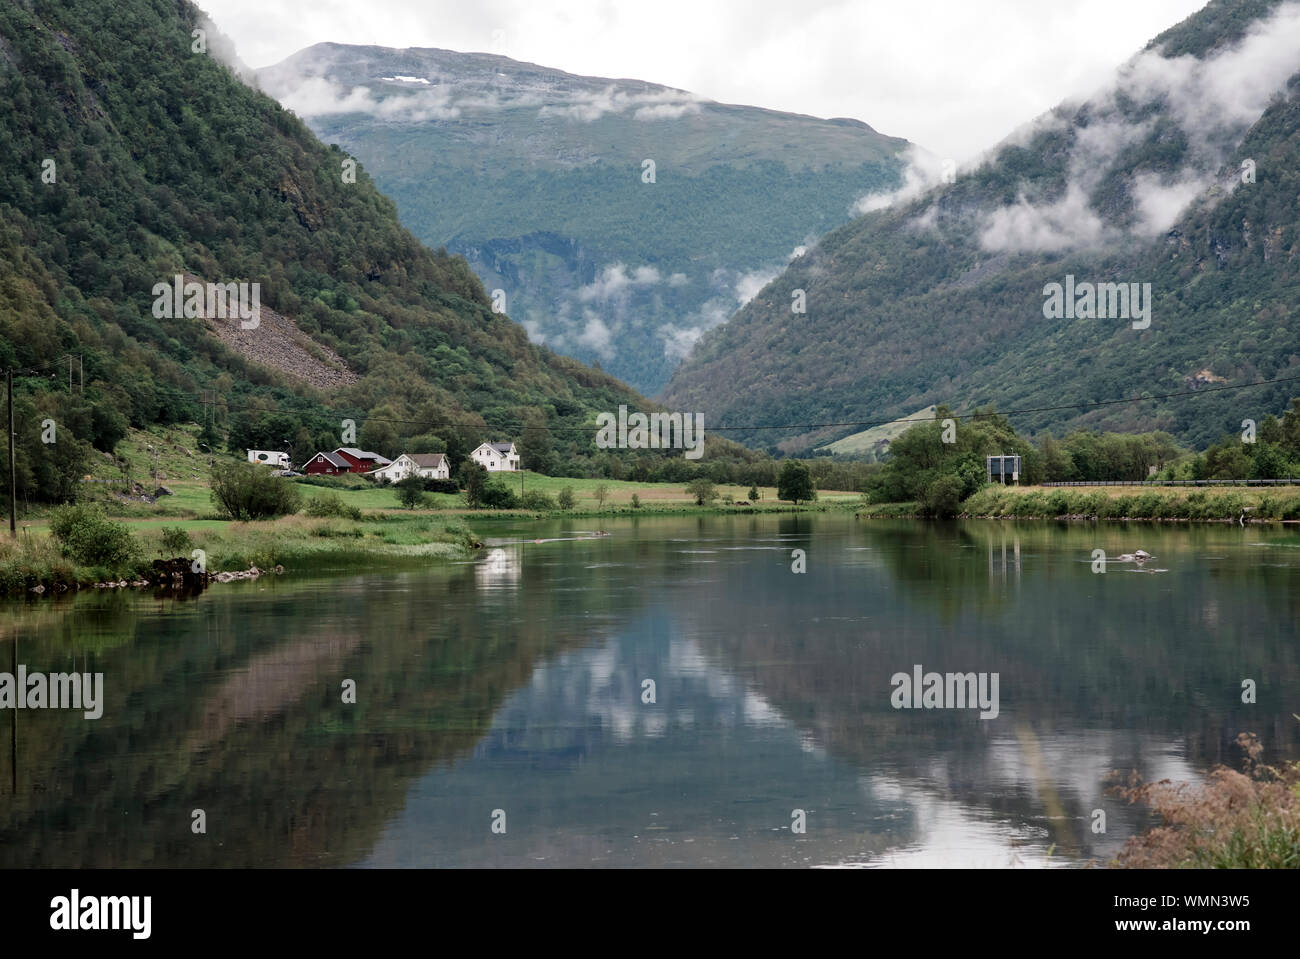 Traditional Nordic houses nessled in a valley of mountains & ocean Stock Photo